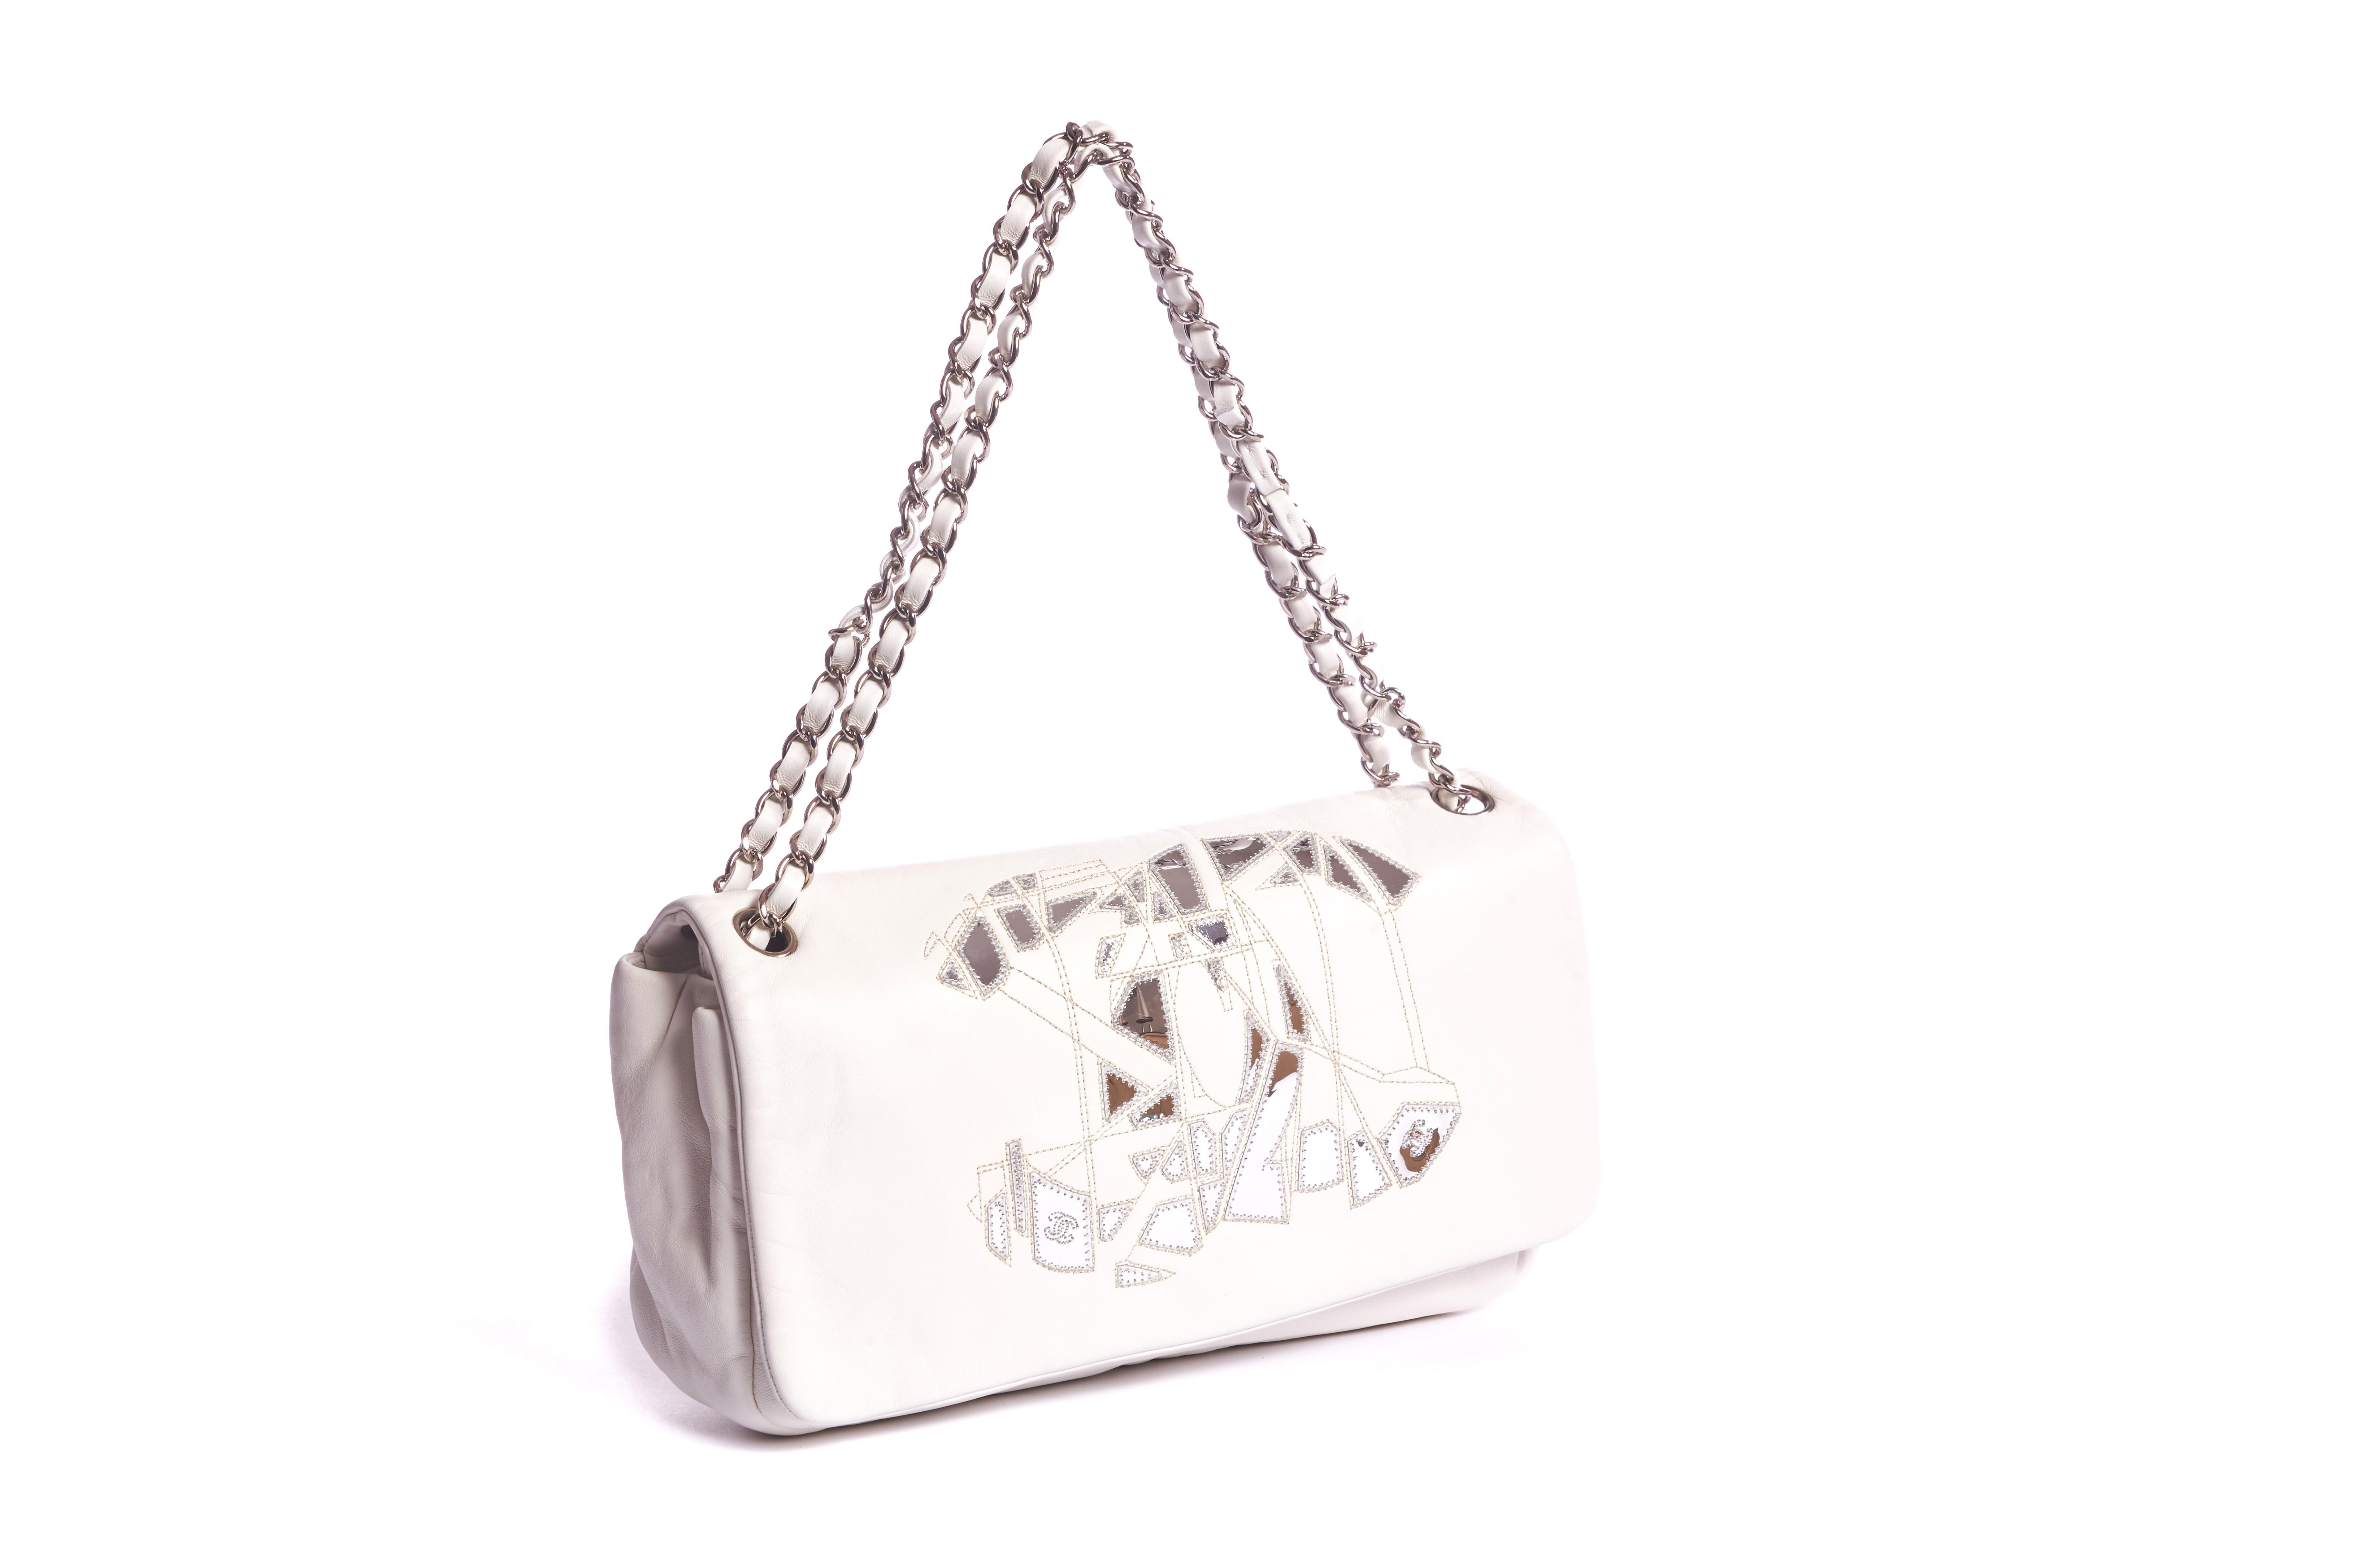 Chanel mint condition white mirror cc logo single flap bag with silver hardware. Shoulder drop 8.5